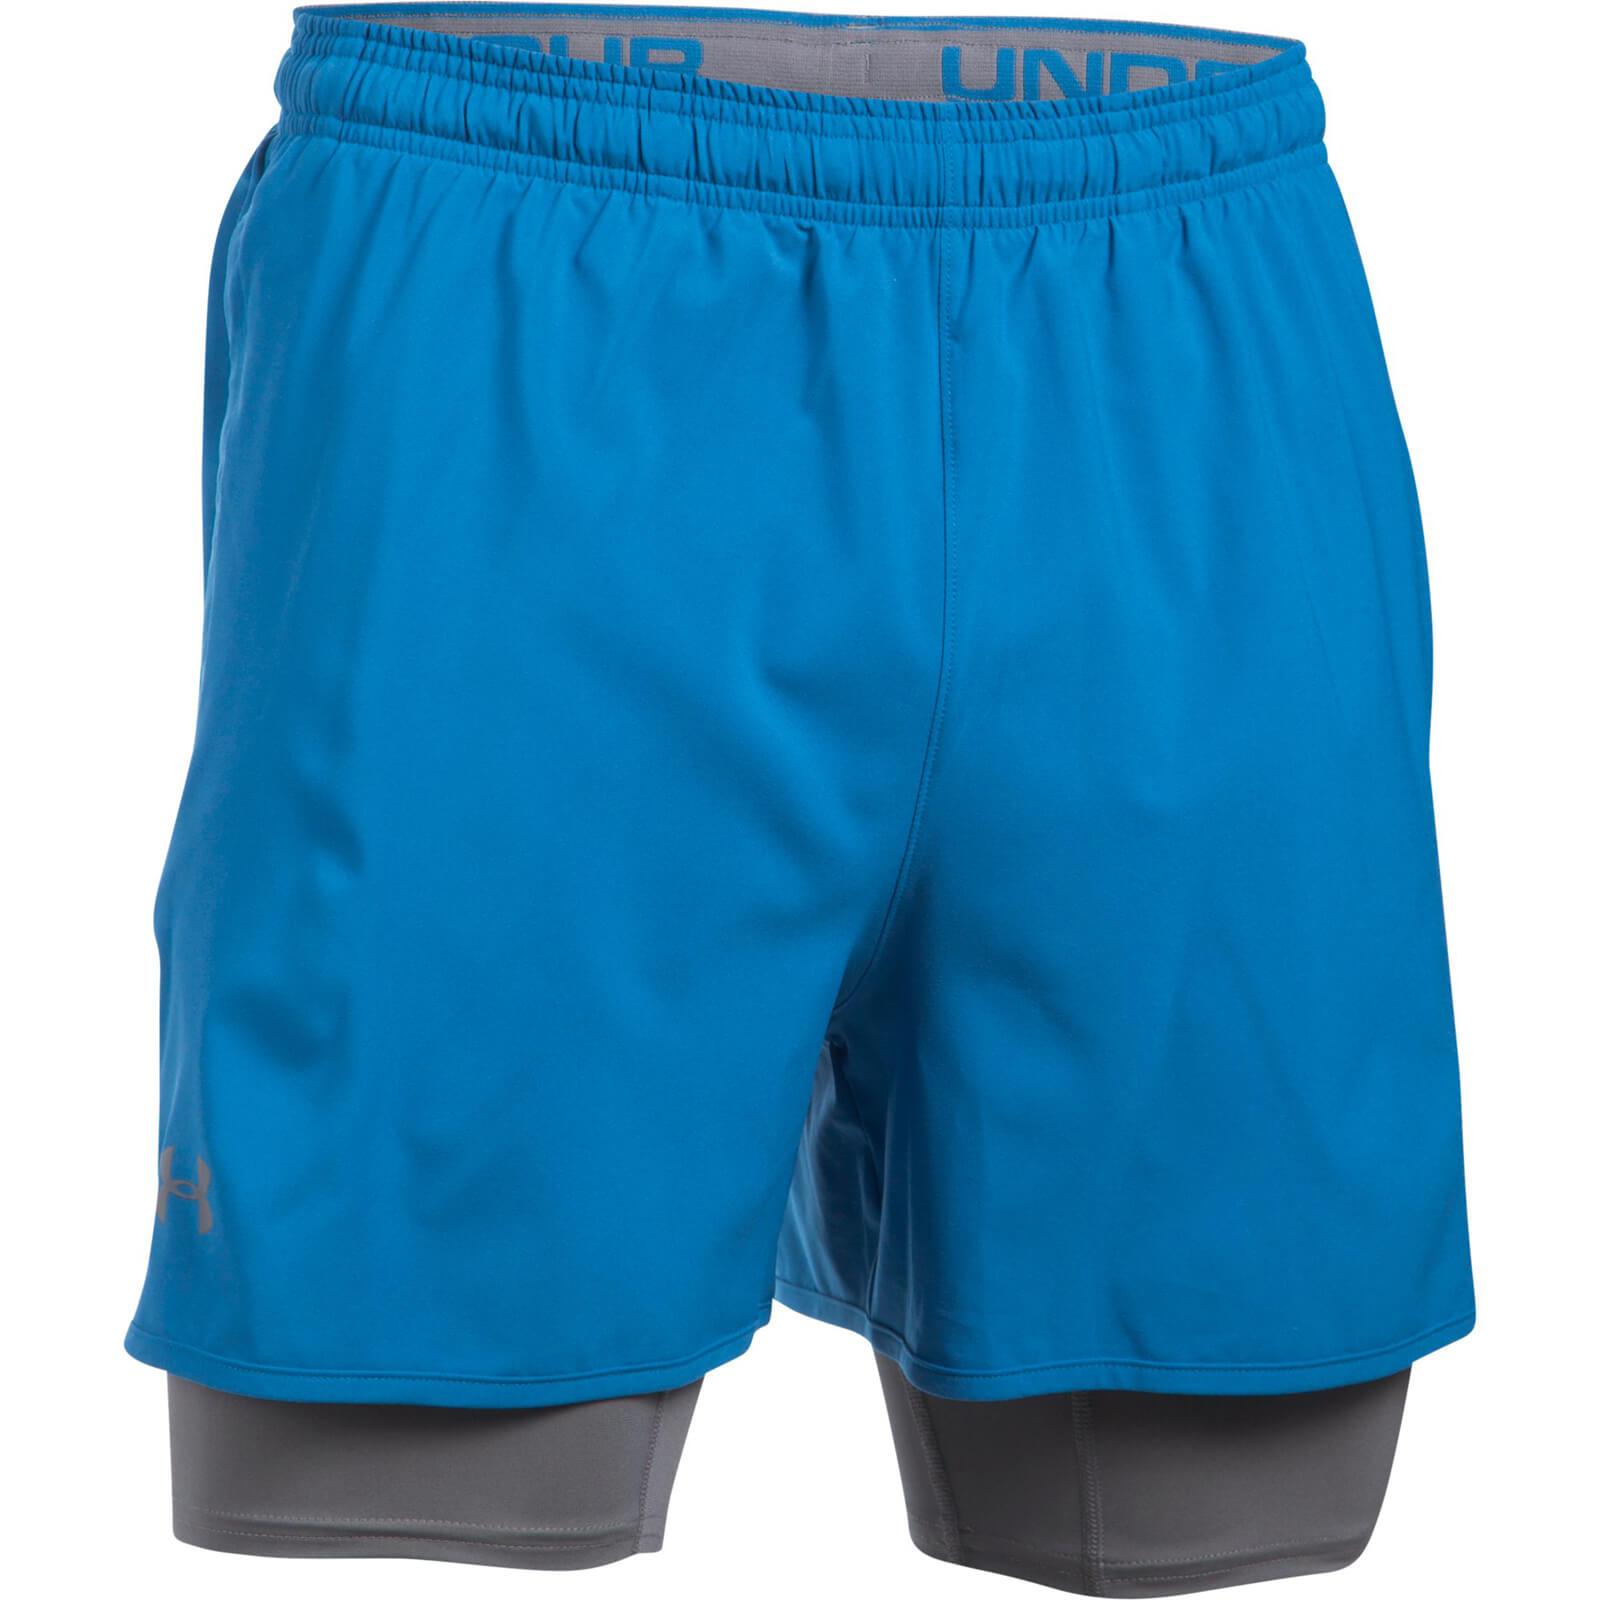 Lyst - Under Armour Qualifier 2-in-1 Shorts in Blue for Men